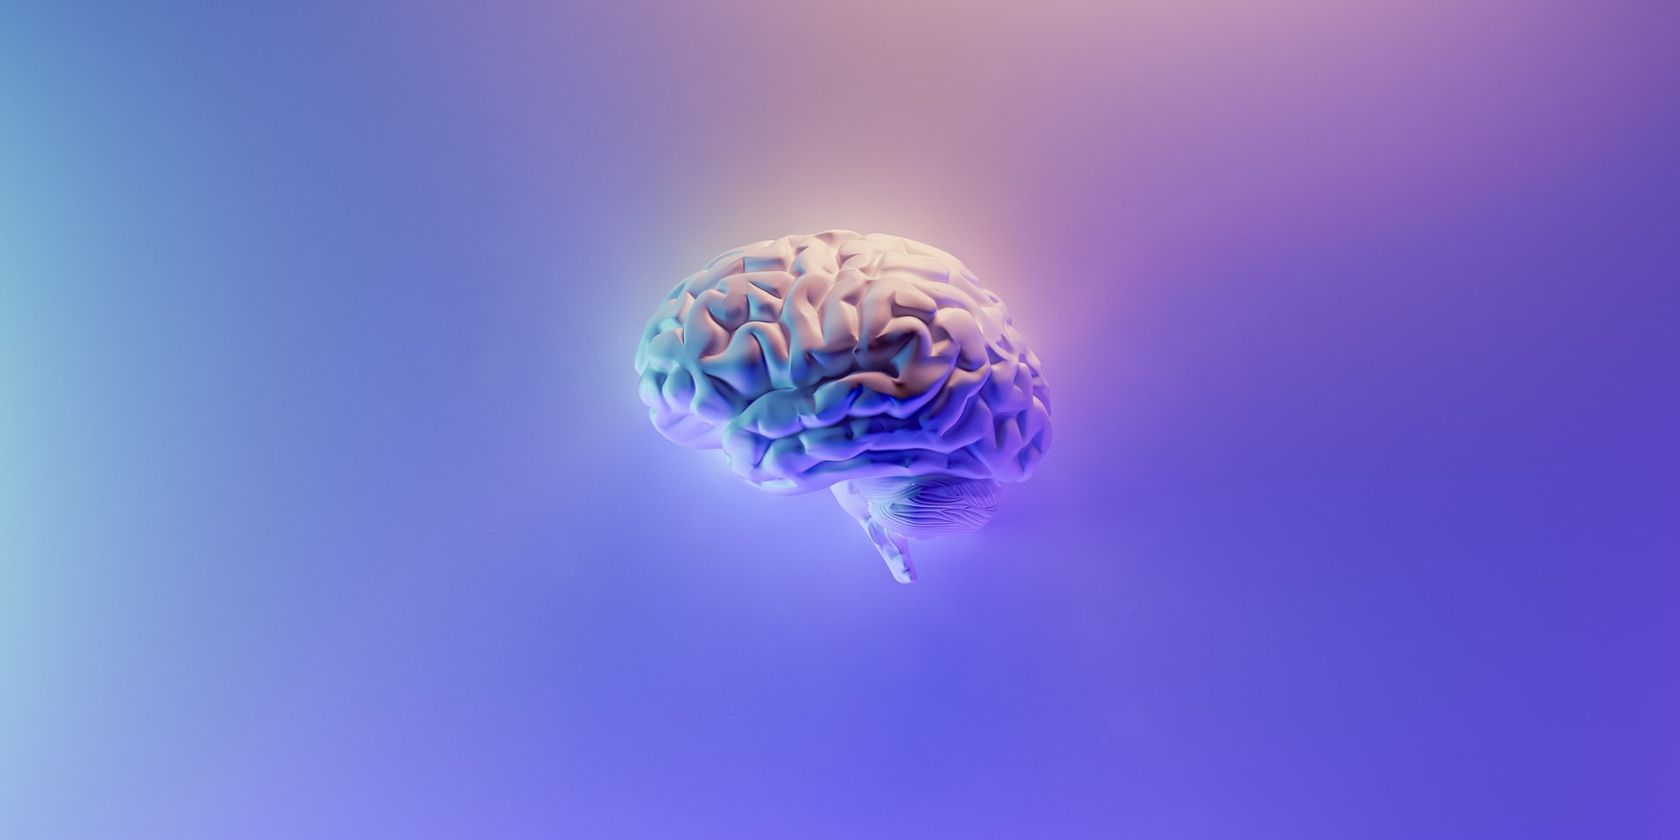 A 3D image of a brain in blue, purple, and pink ombre